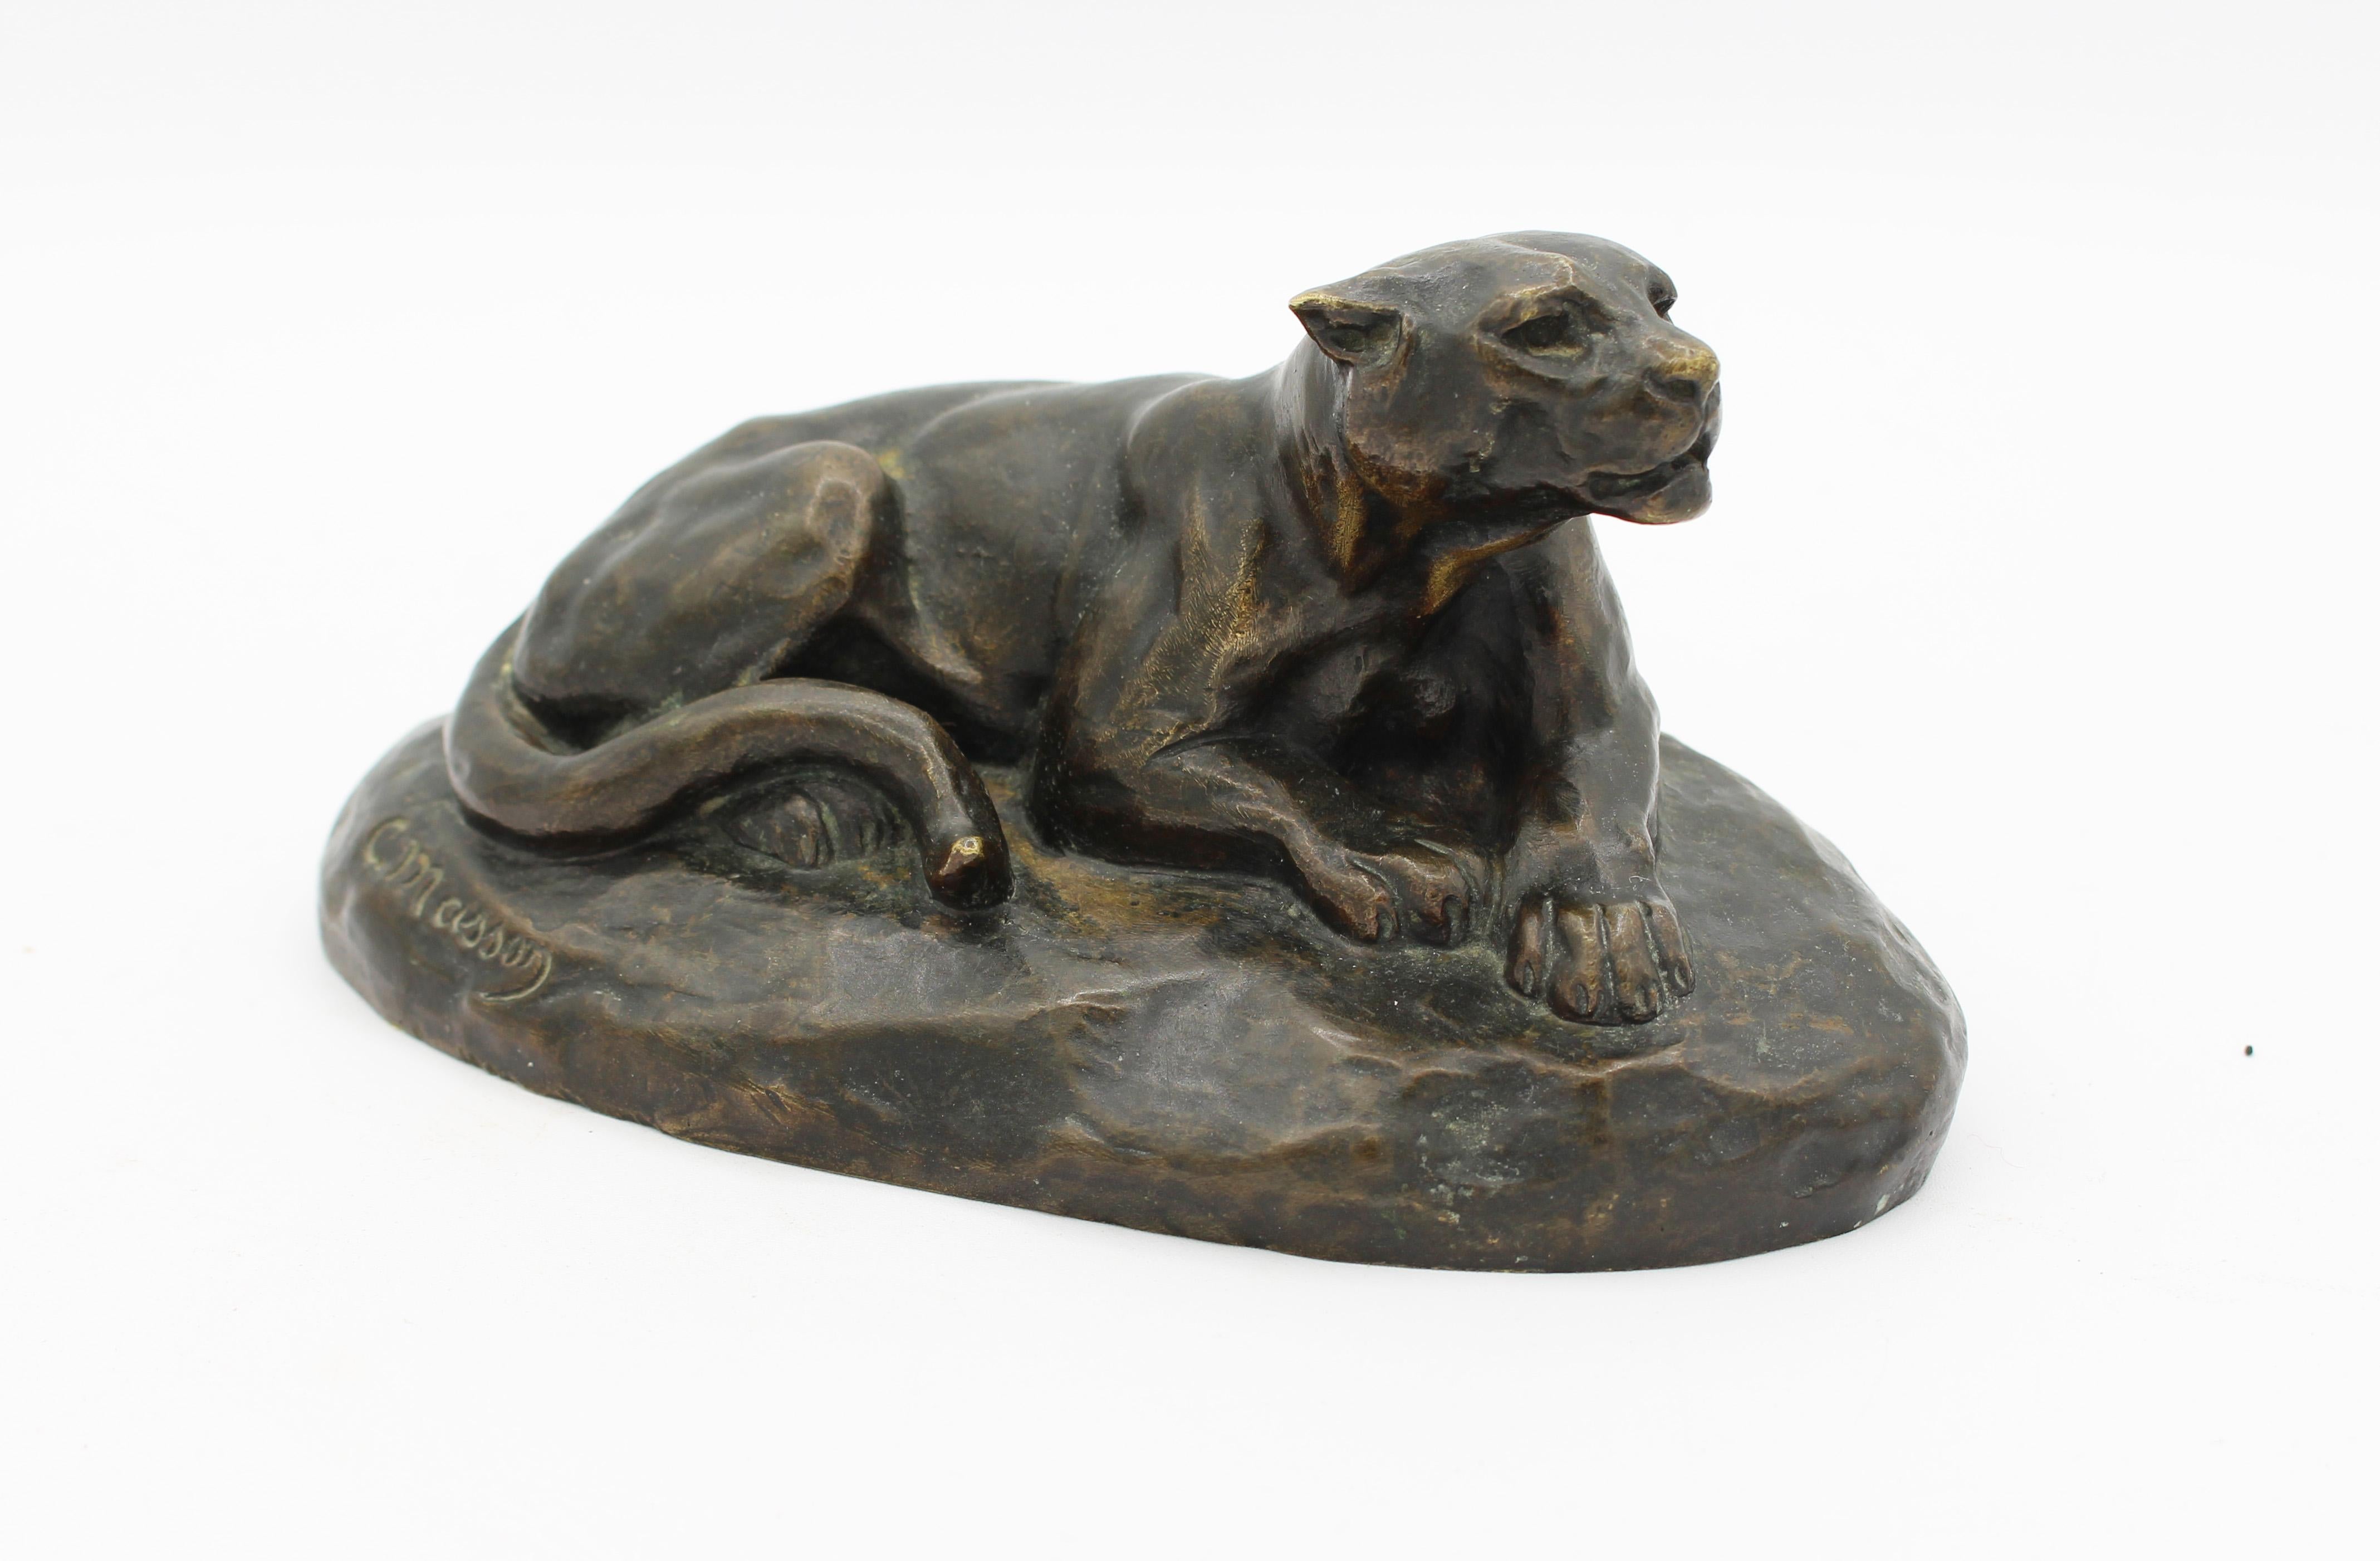 A signed C. Masson animalier bronze lions - recumbent yet alert, c.1900. Clovis-Edmond Masson, France, 1838-1913. Pupil of Barye, Rouillard & Santiago. Exhibited regularly at The Salon from 1867-1909. His sculpting anticipated the style dominant